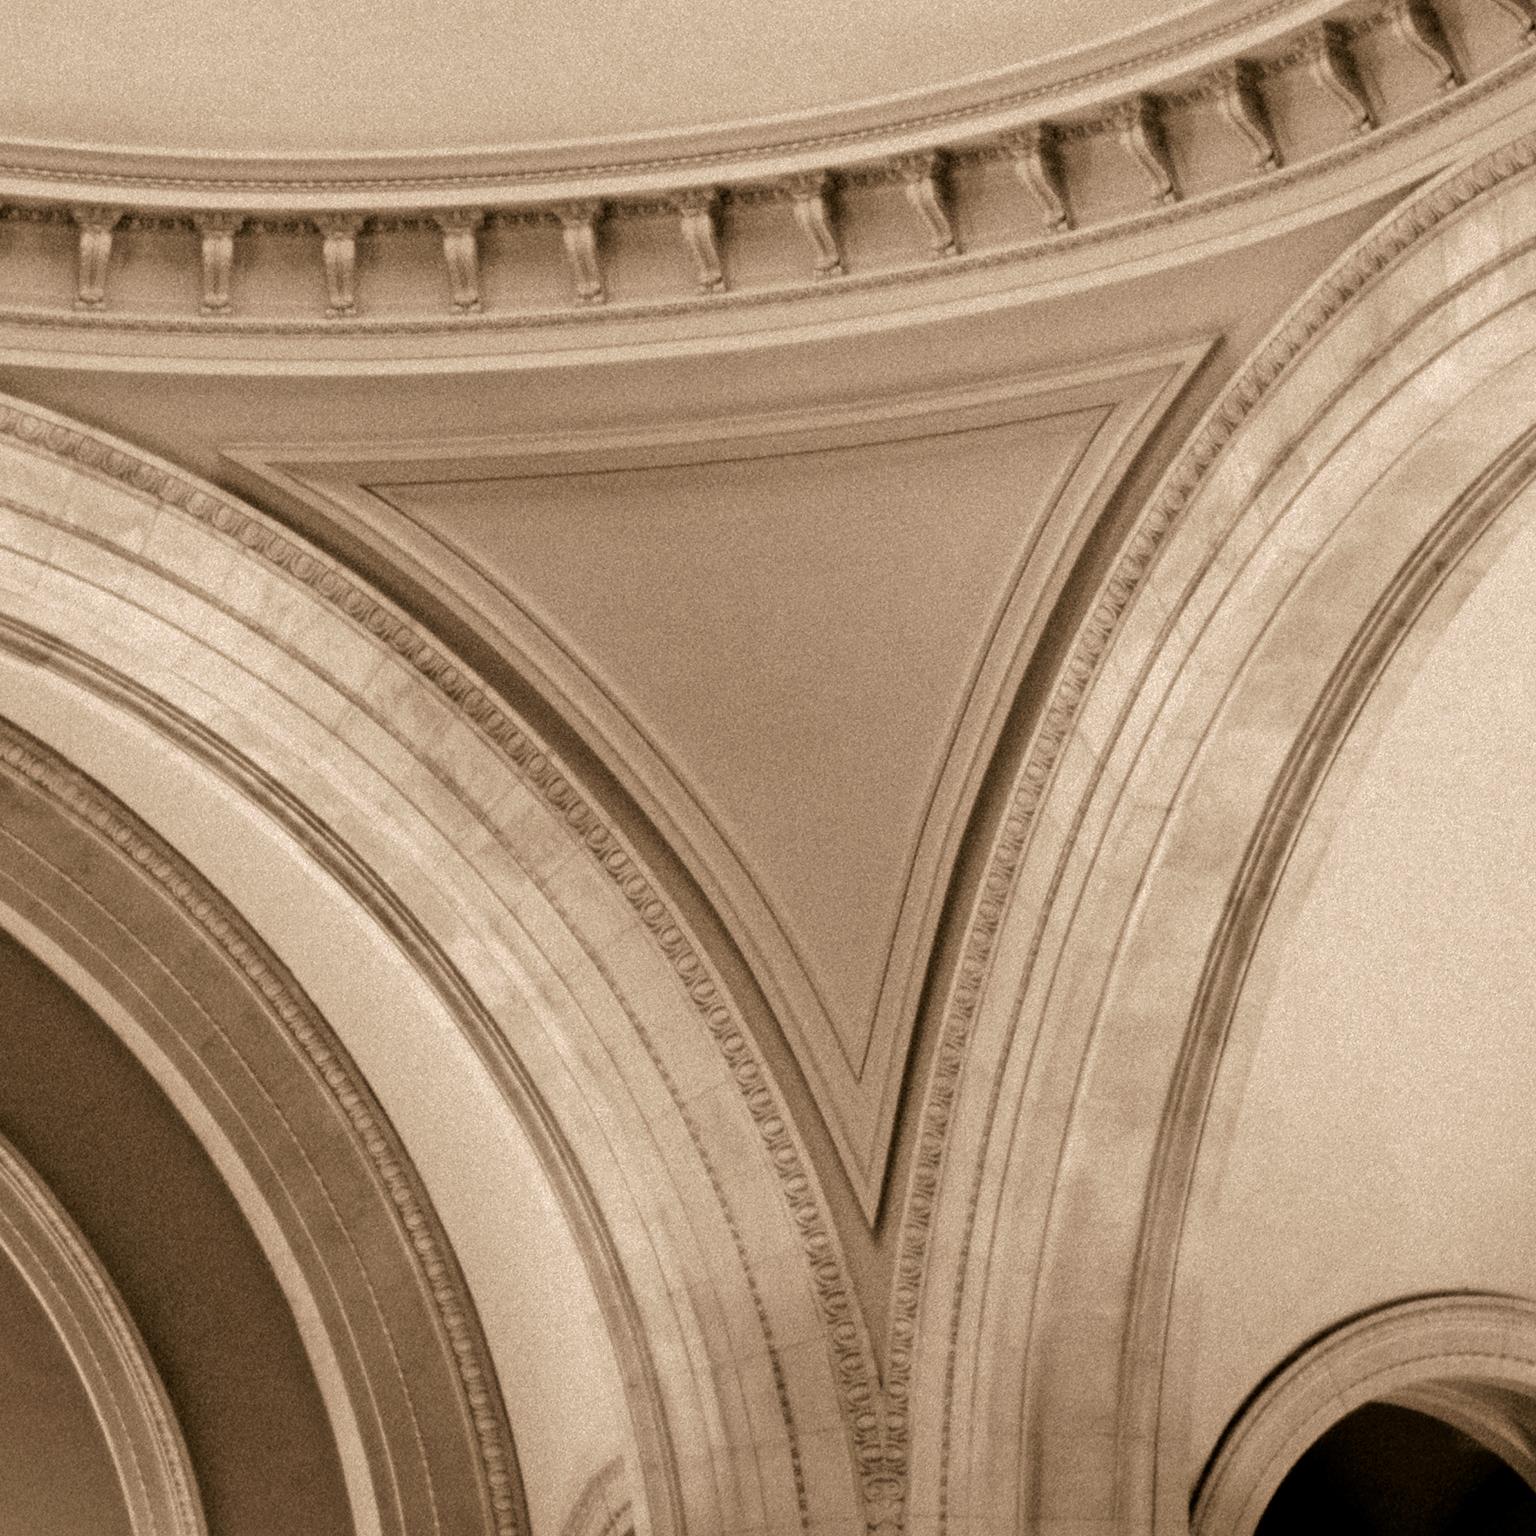 Symphony of Arches. New York City, USA, 2001
Photograph by Cosmo Condina. Rotunda of the Metropolitan Museum of Art. 
Archival pigment print 19 X 12.8 in. Edition of 10. This is # 3/10 in the edition.

Architectural detail of the Great Hall of the